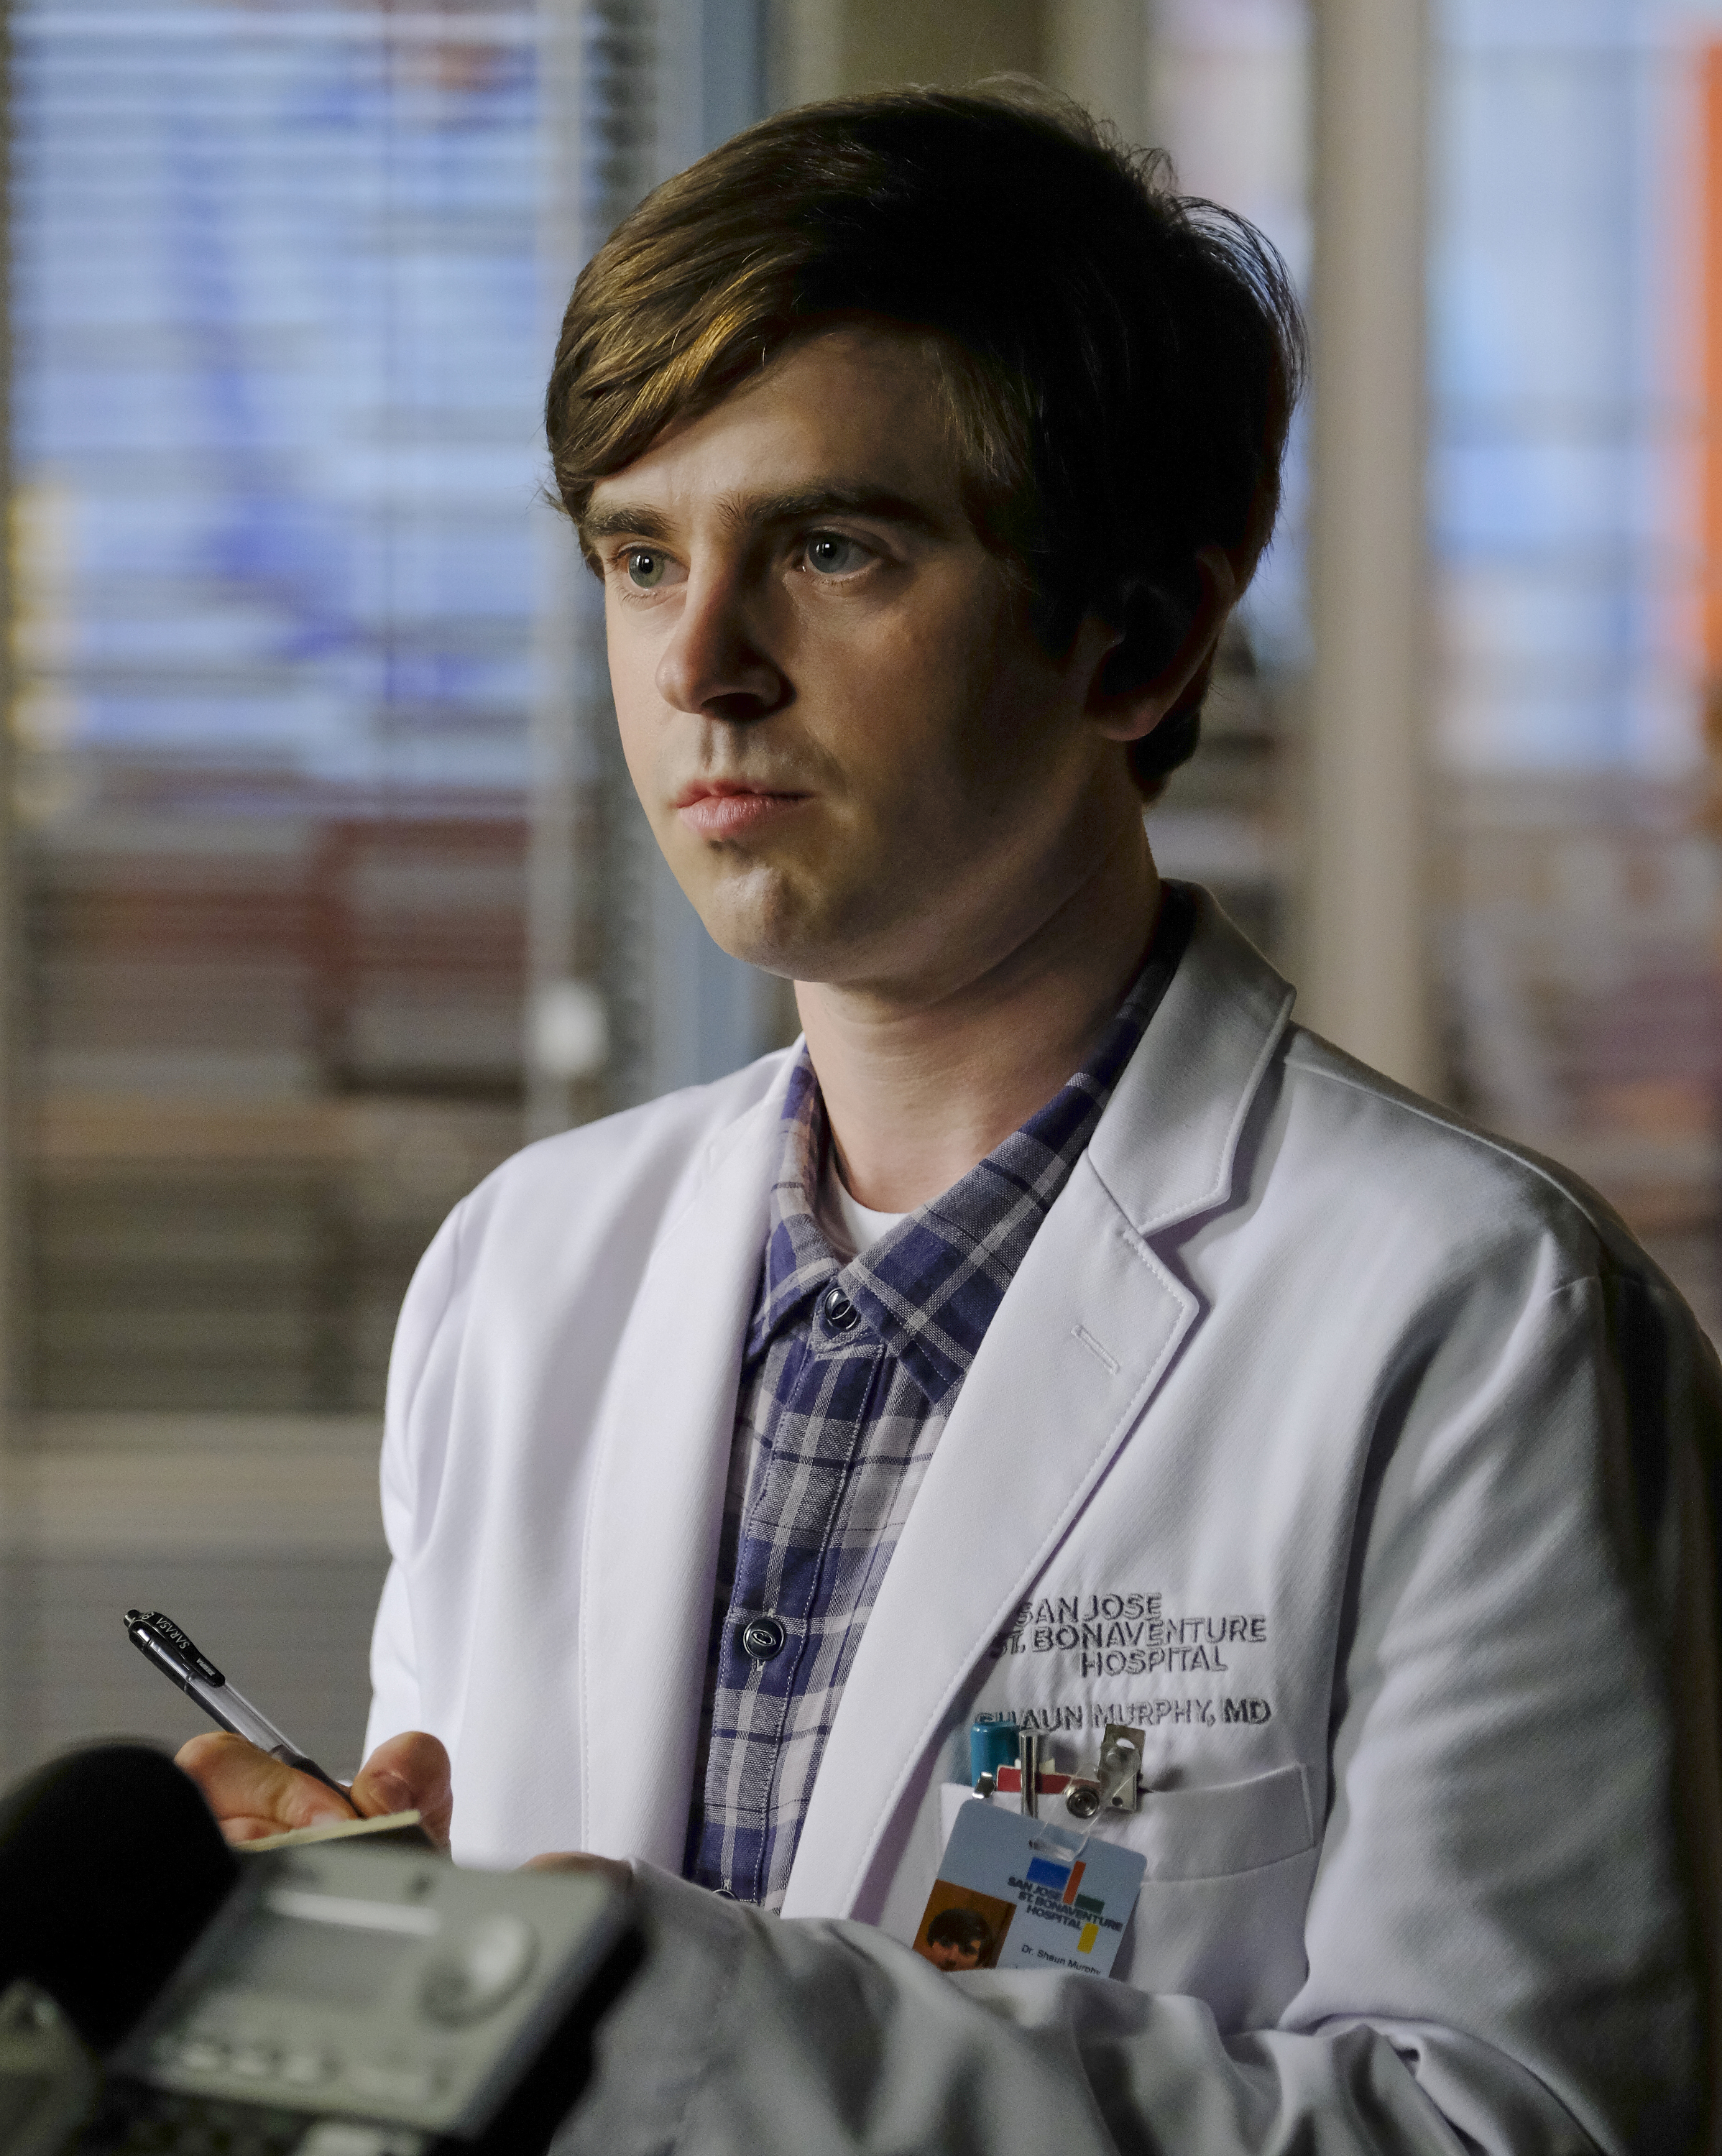 Freddie Highmore on "The Good Doctor" on February 18, 2021. | Source: Getty Images